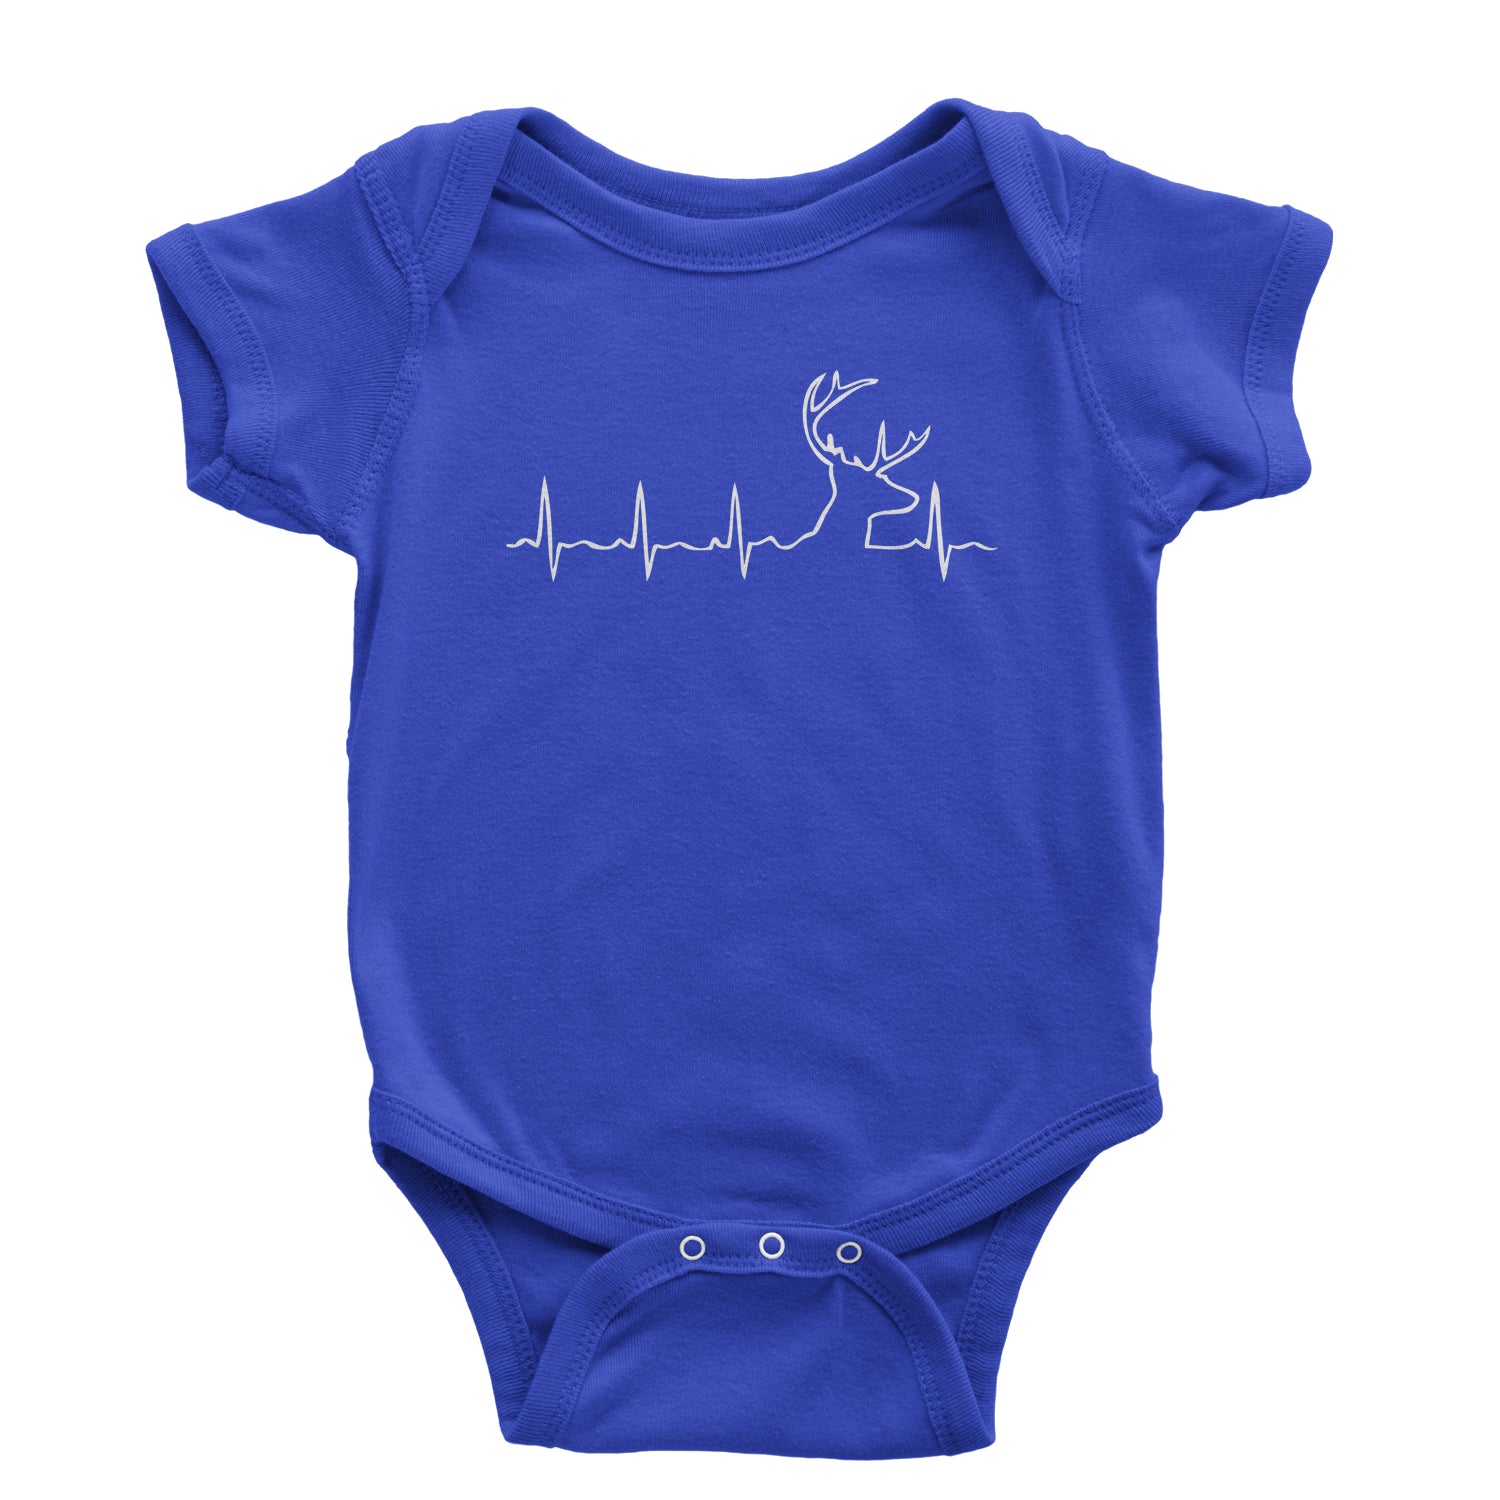 Hunting Heartbeat Dear Head Infant One-Piece Romper Bodysuit and Toddler T-shirt #expressiontees by Expression Tees